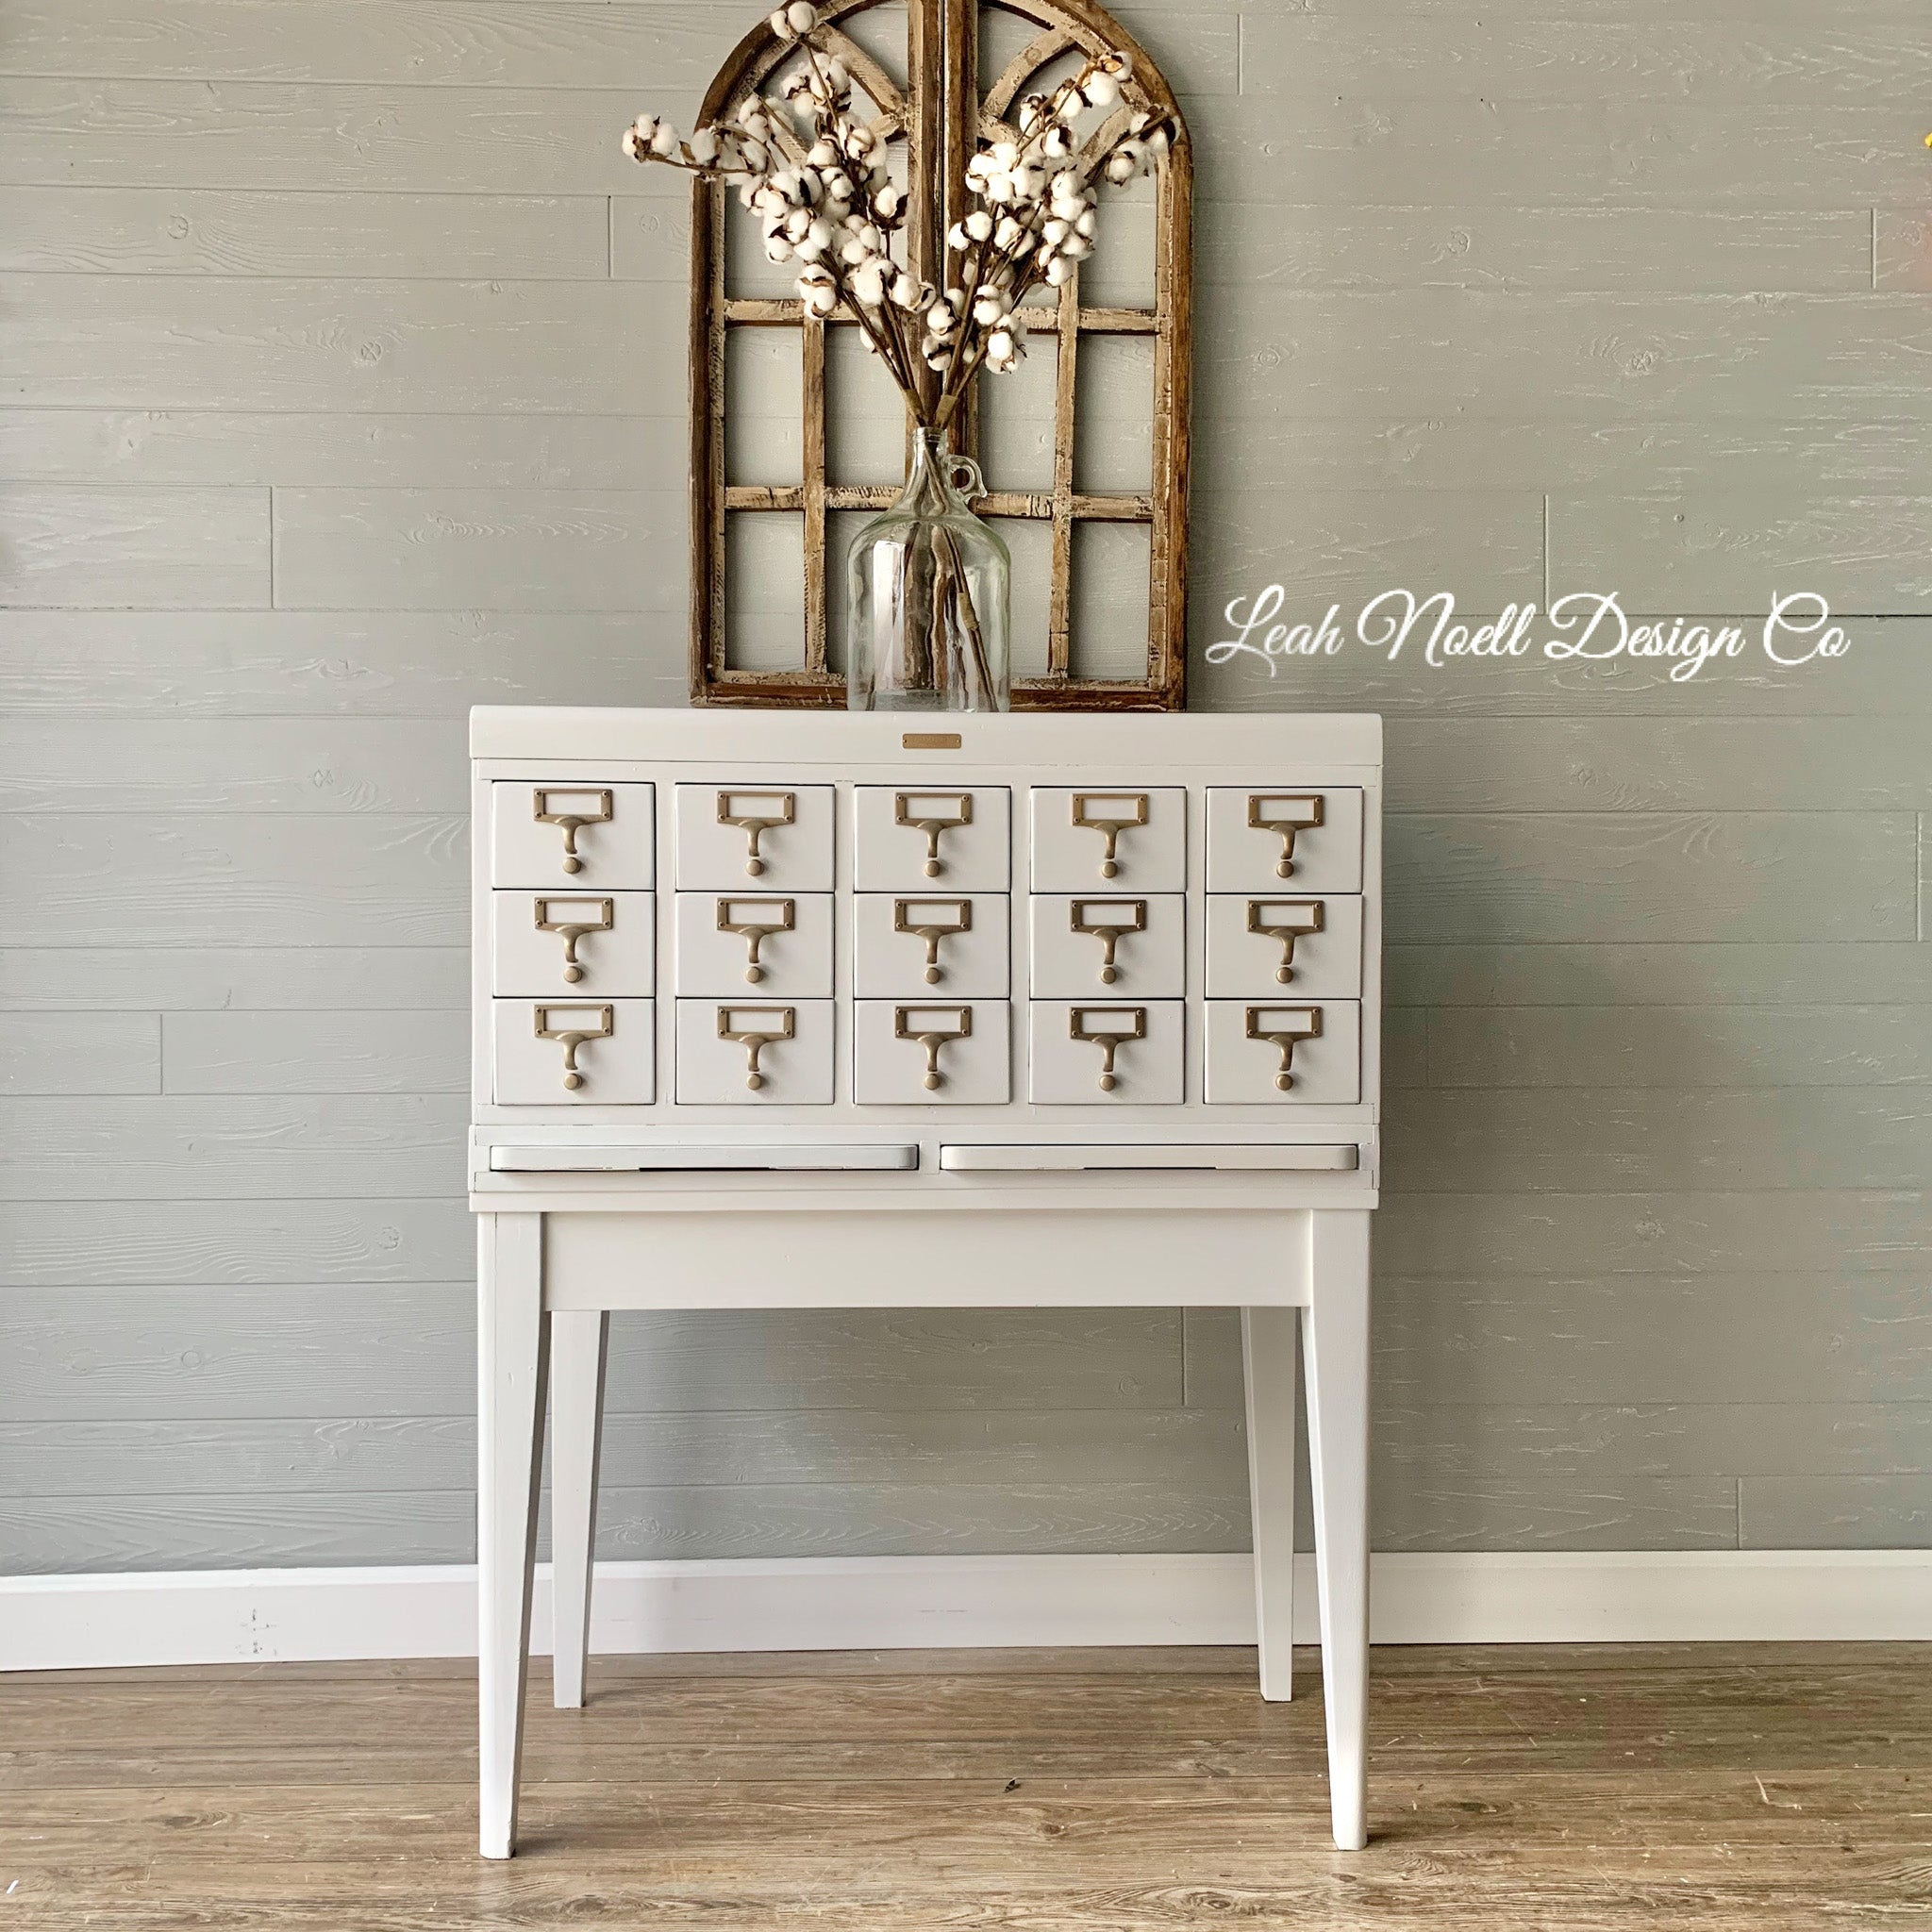 A vintage metal card cabinet refurbished by Leah Noell Design Company is painted in Dixie Belle's Cotton chalk mineral paint.